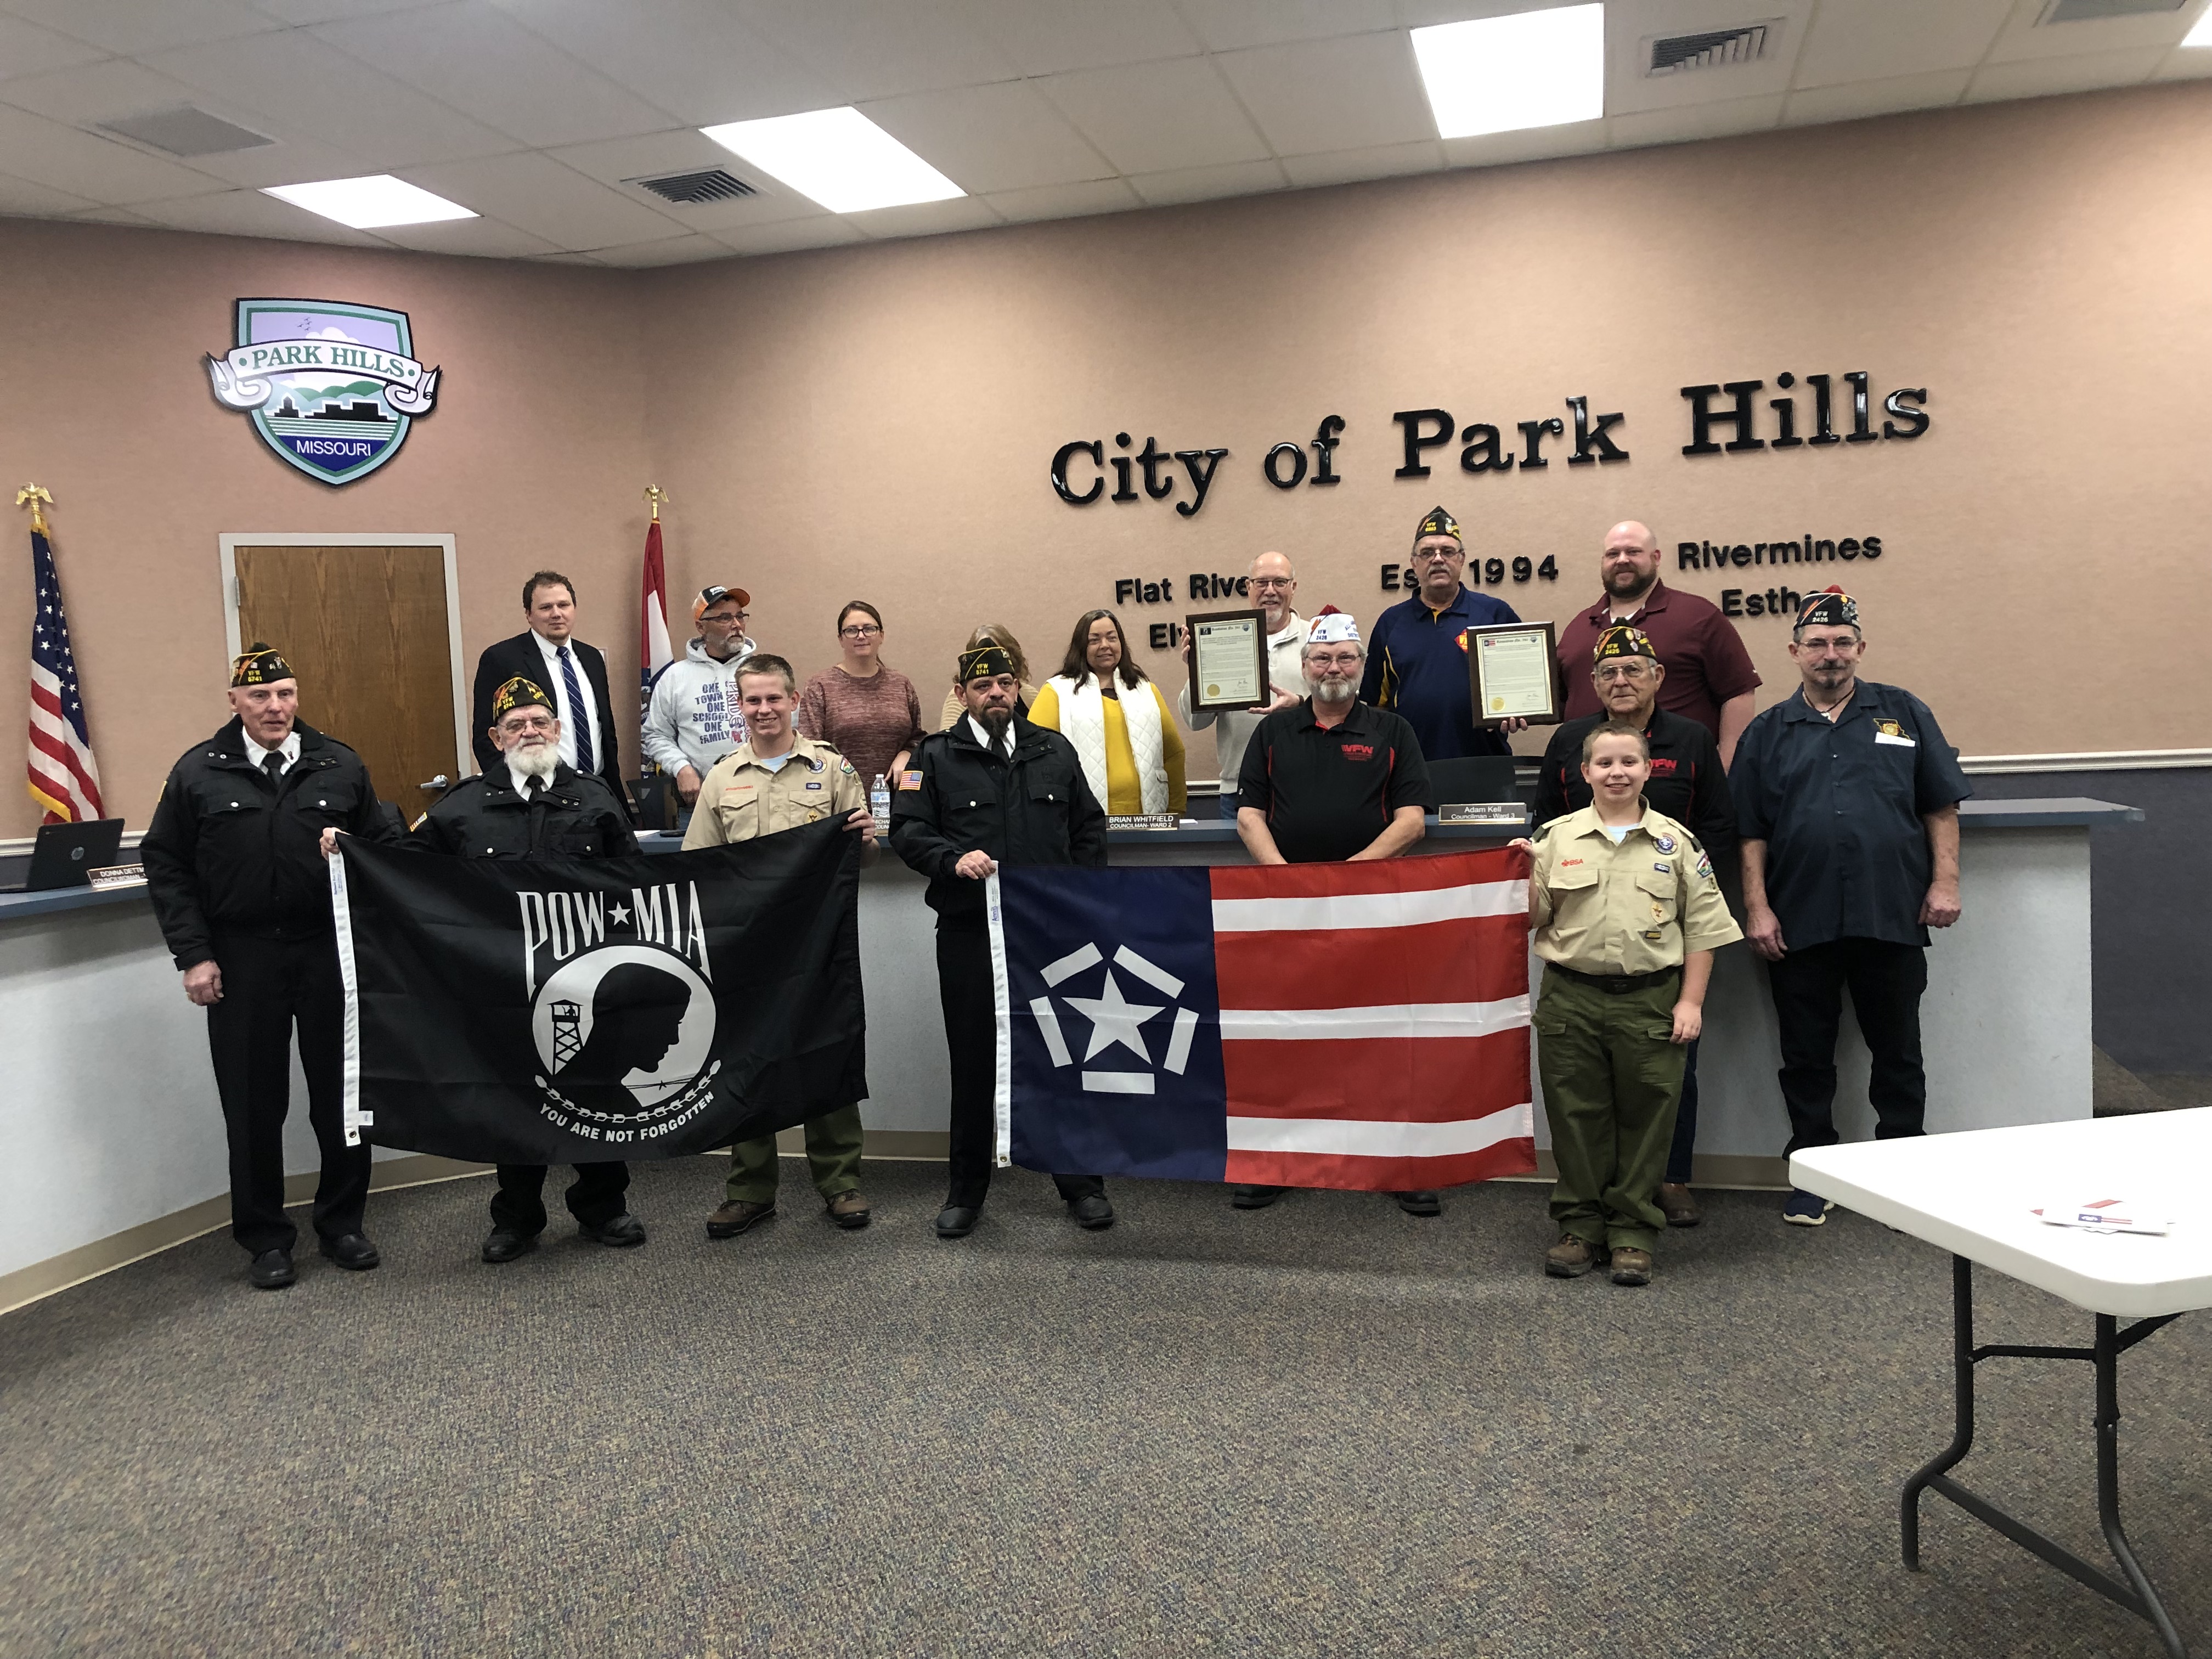 Patriotic Flags to Fly in Park Hills